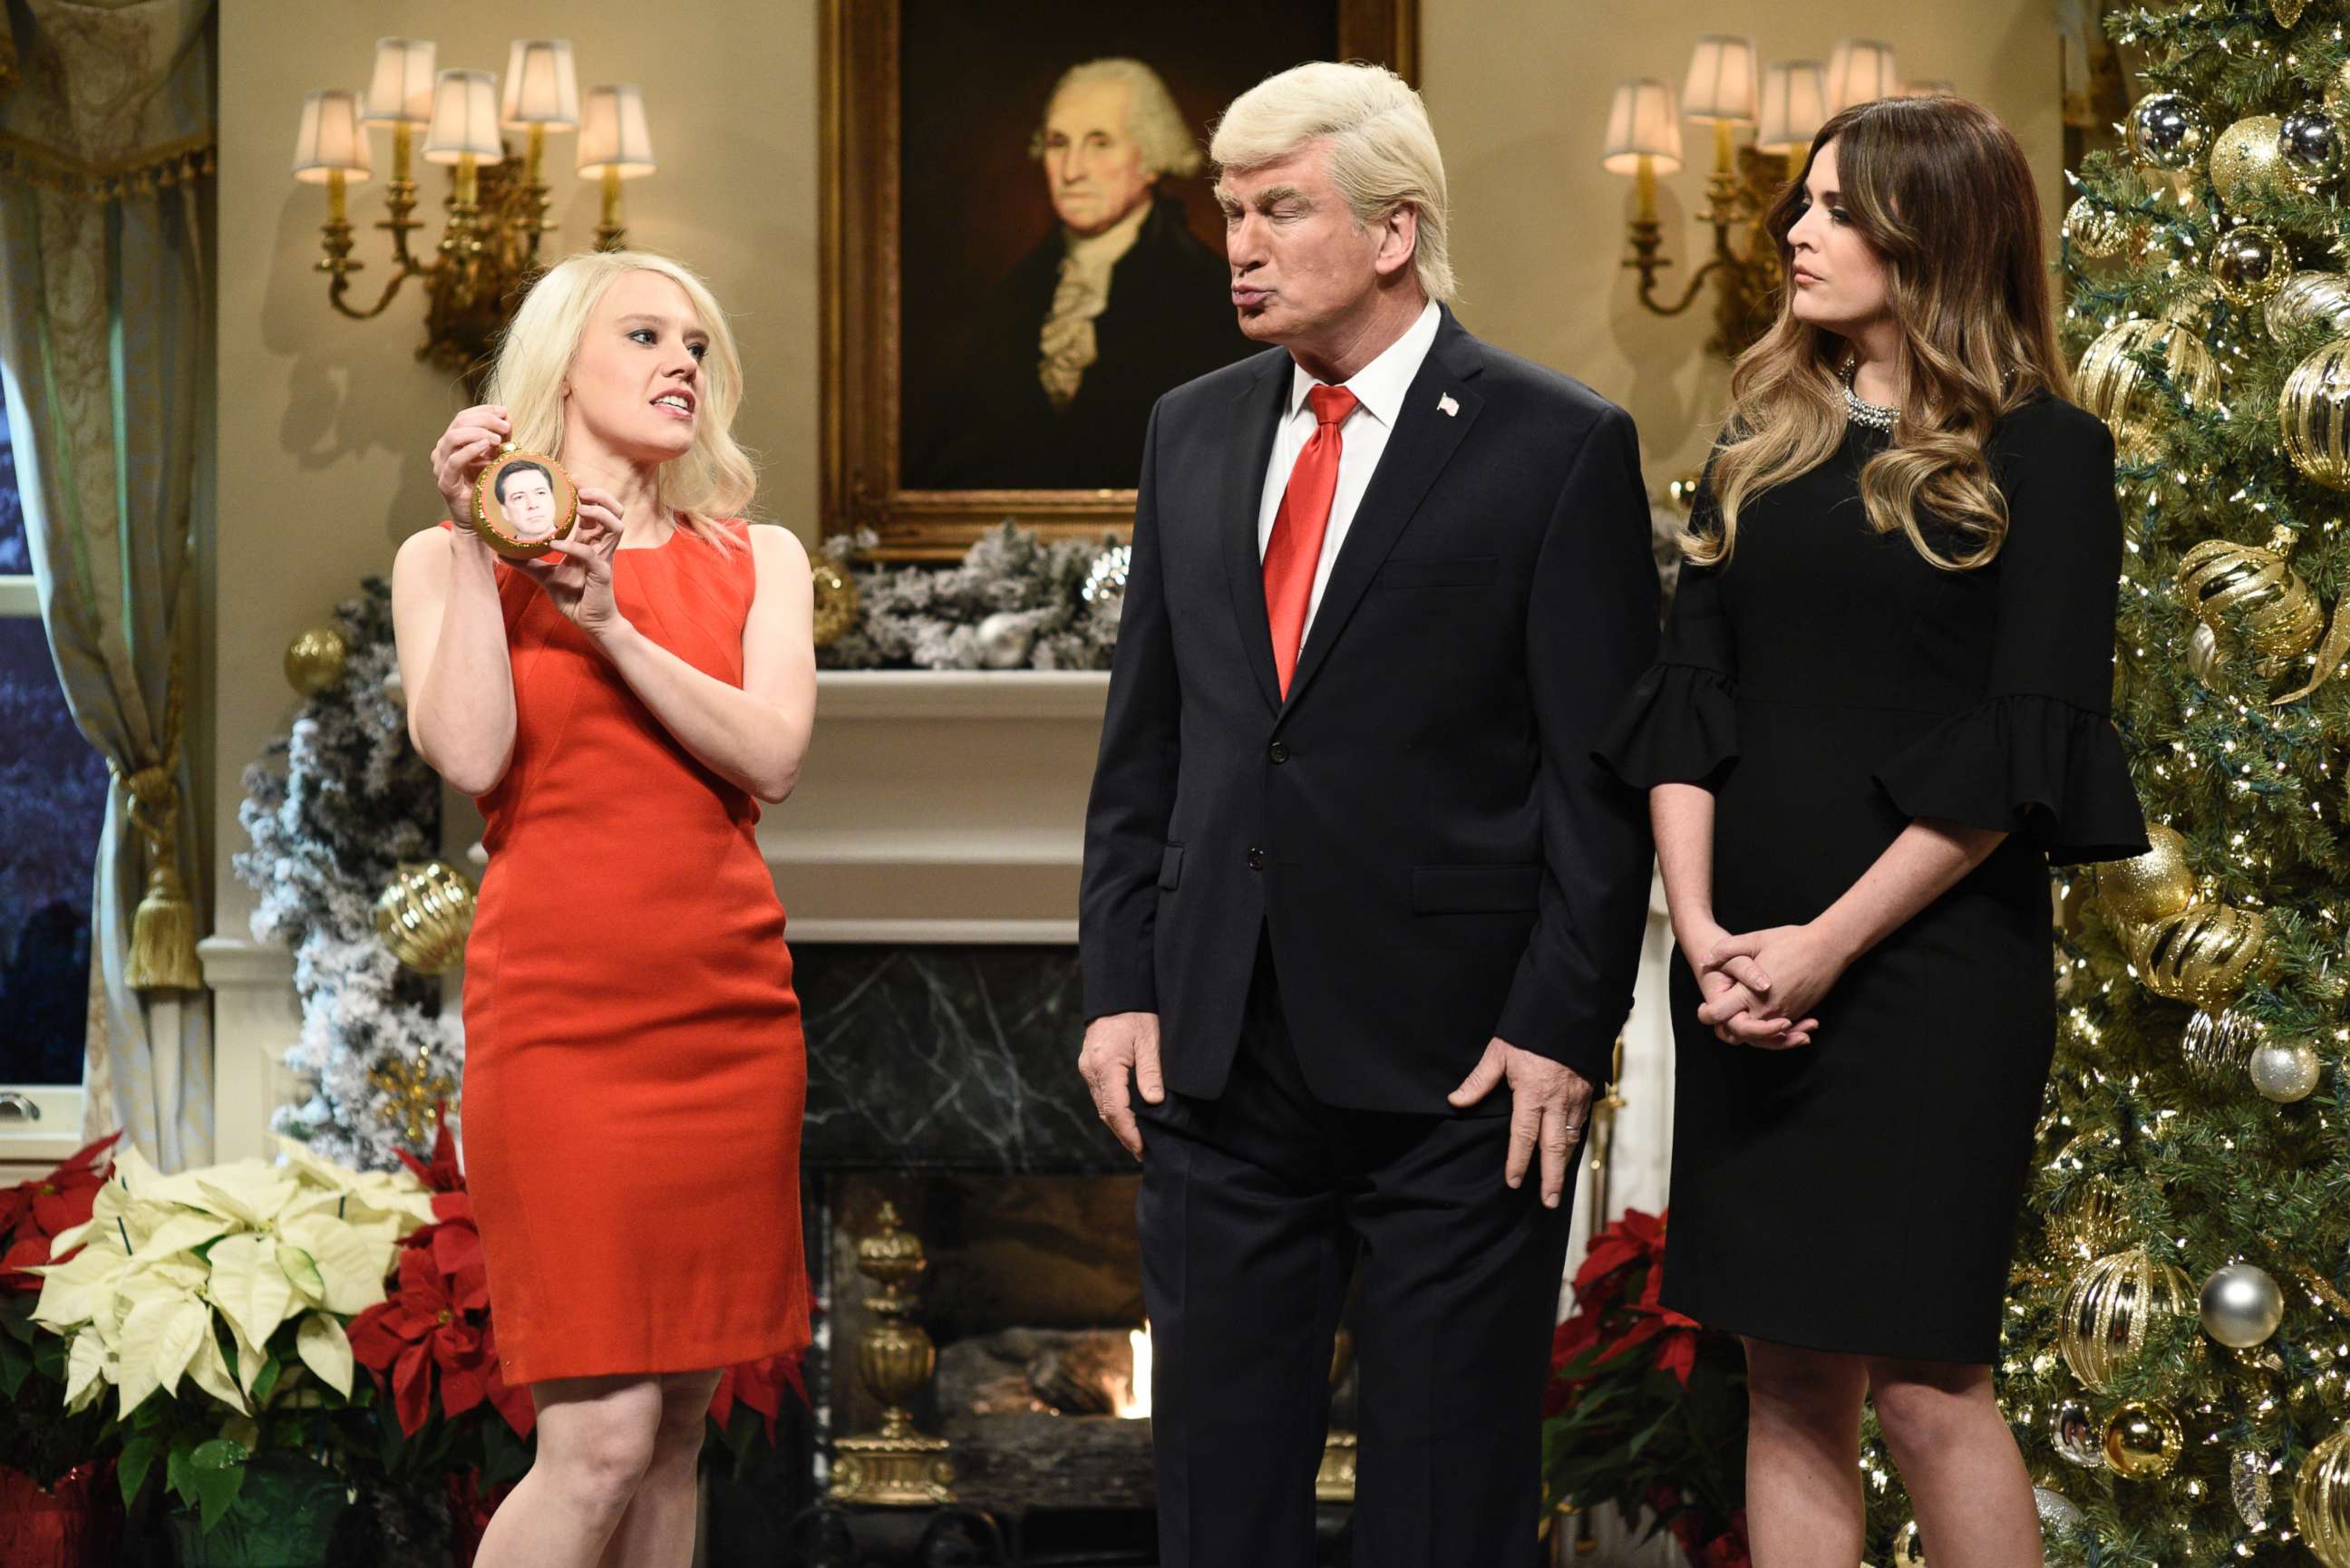 PHOTO: SATURDAY NIGHT LIVE -- Episode 1734 -- Pictured: (l-r) Kate McKinnon as Counselor to the President Kellyanne Conway, Alec Baldwin as President Donald J. Trump, Cecily Strong as First Lady Melania Trump on Saturday, December 16, 2017 